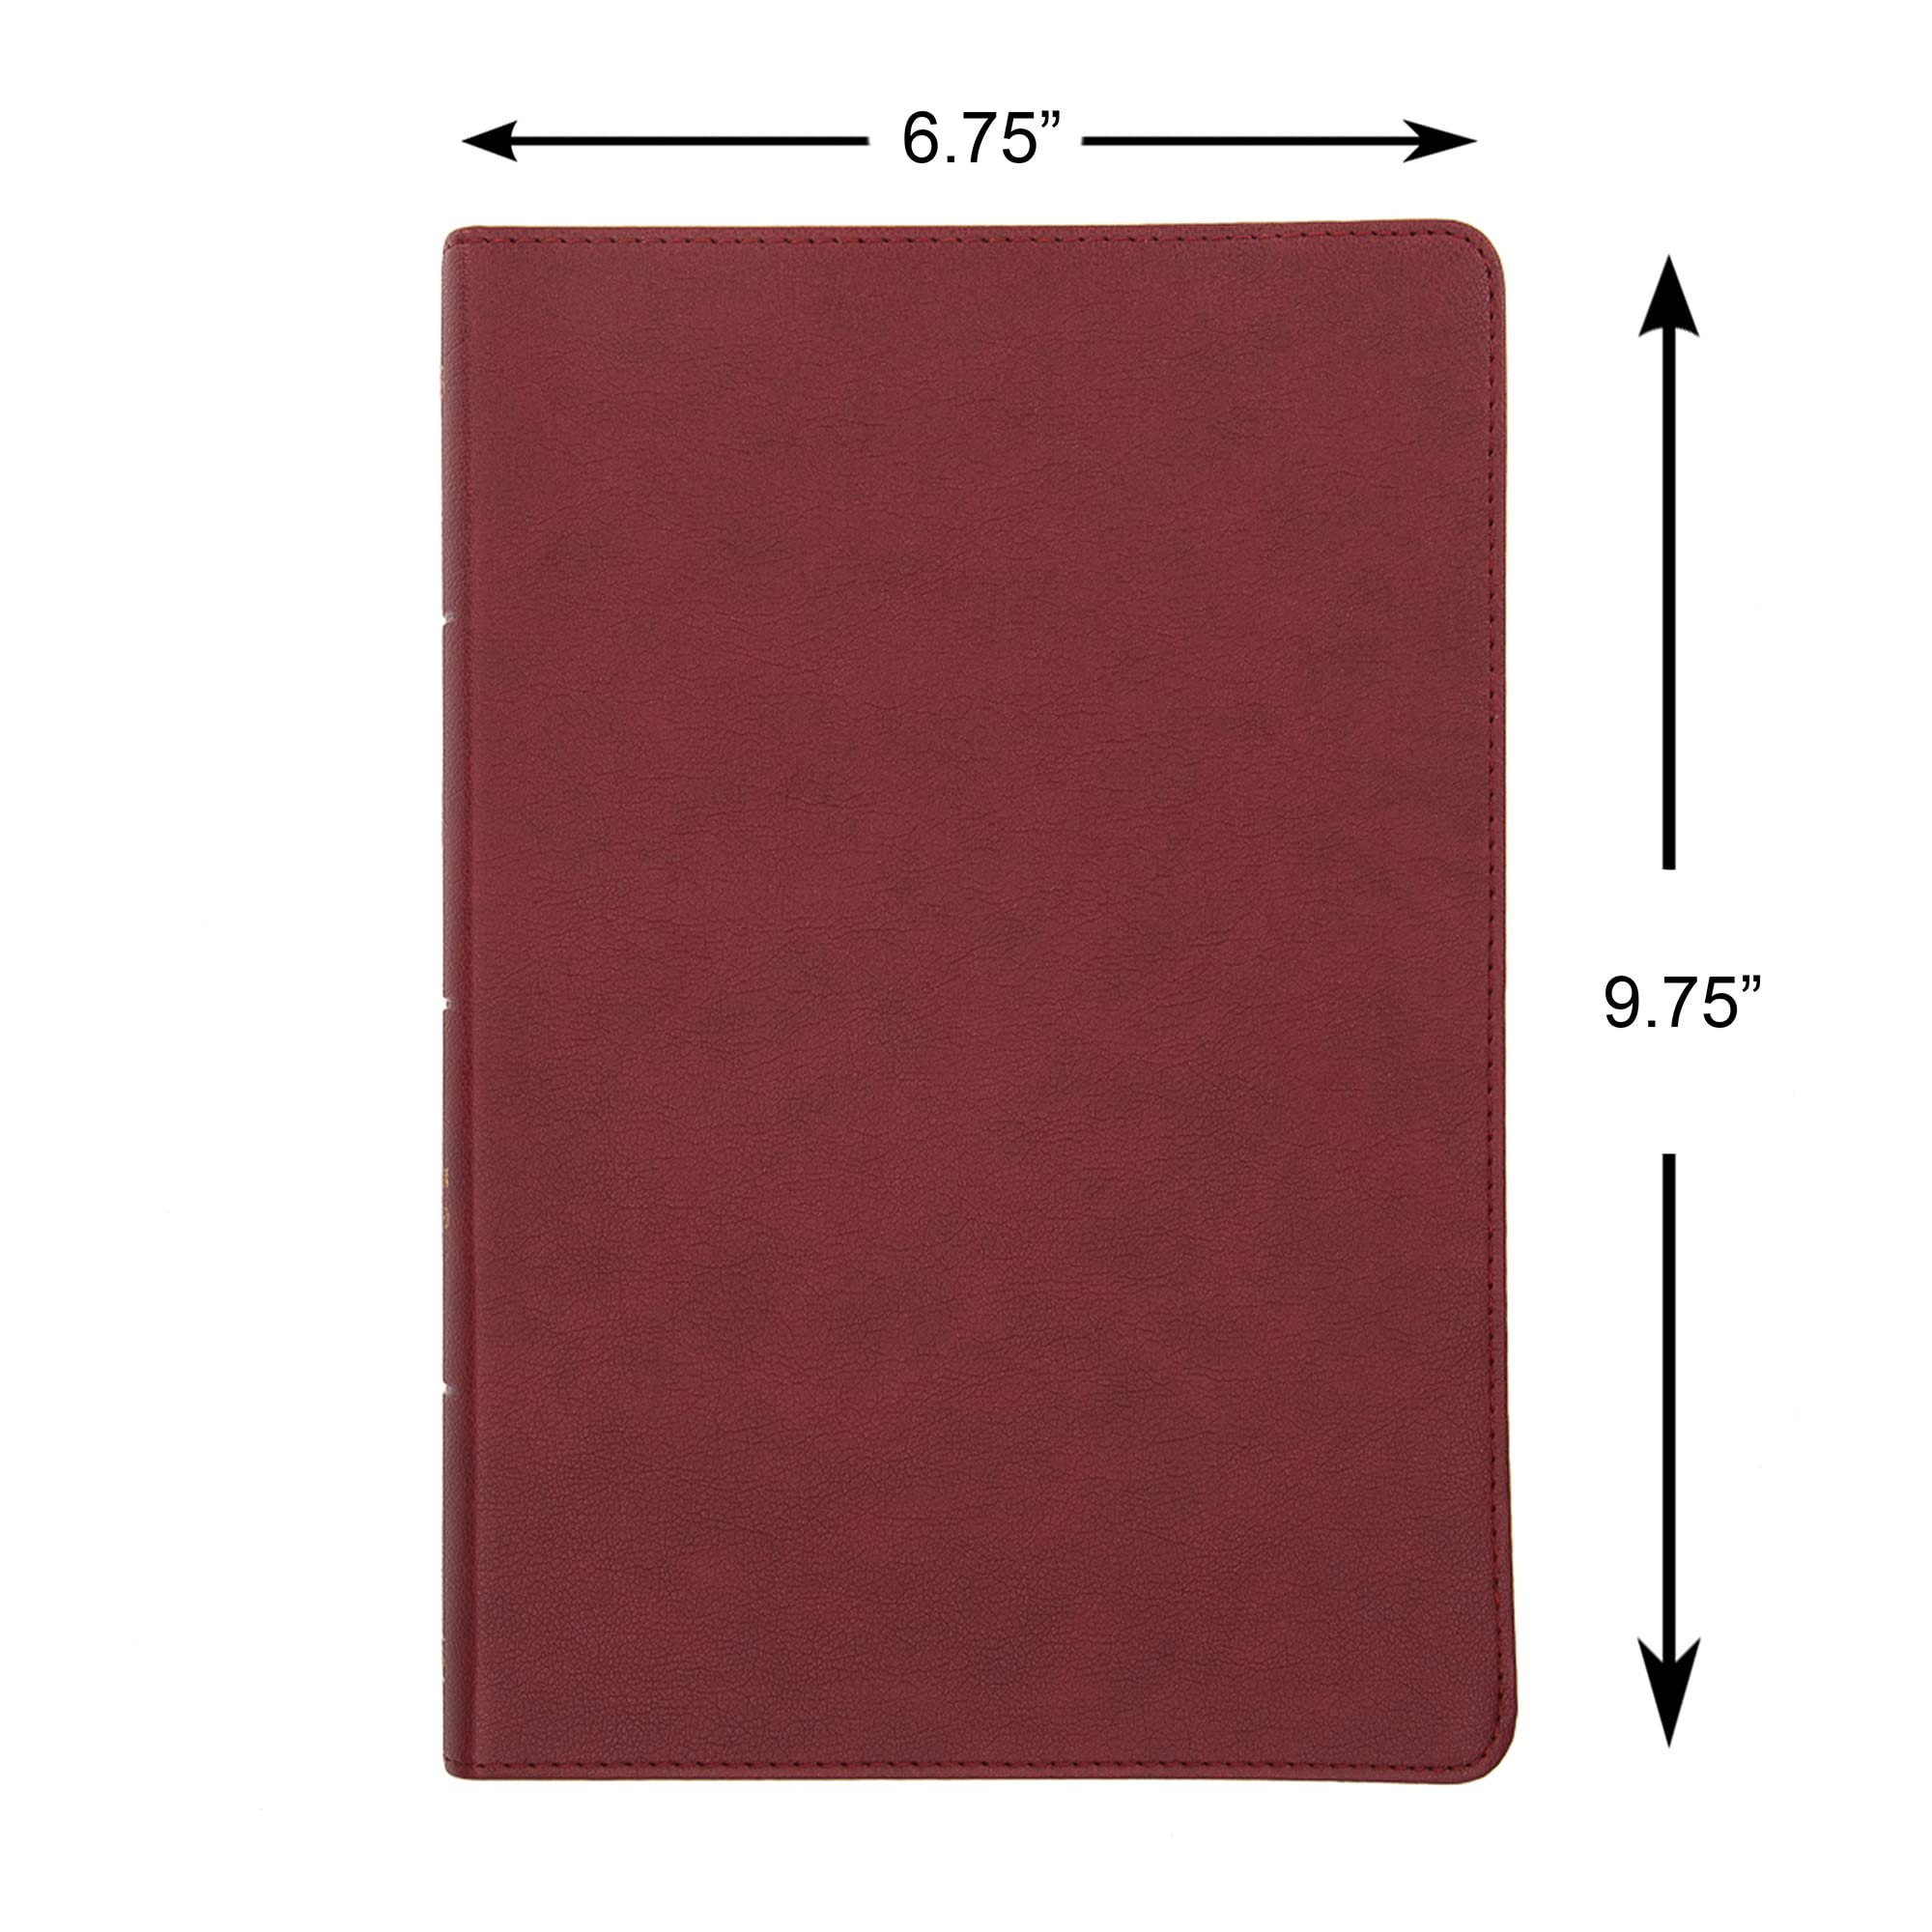 NASB Super Giant Print Reference Bible, Burgundy LeatherTouch, Indexed